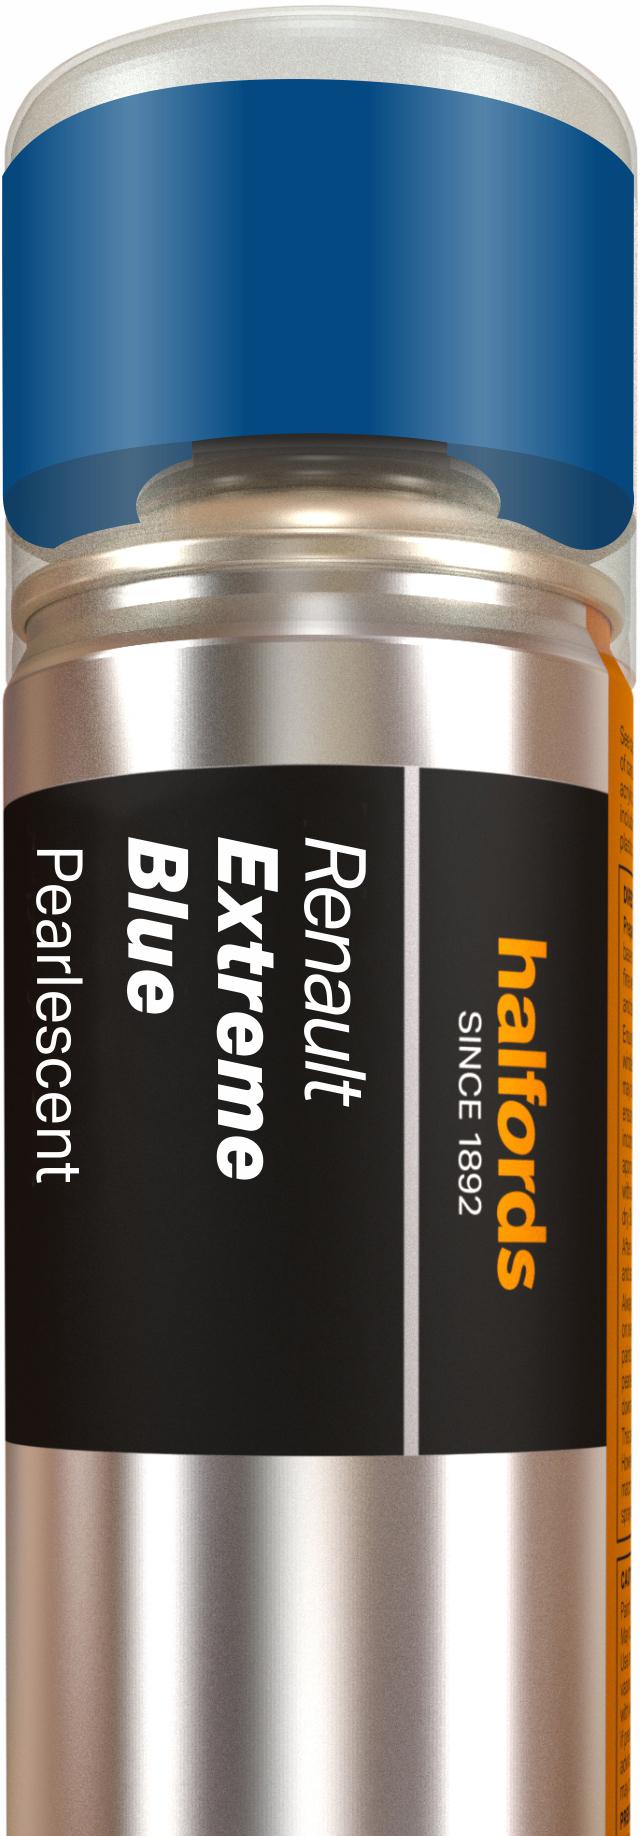 Halfords Renault Extreme Blue Car Spray Paint 300Ml